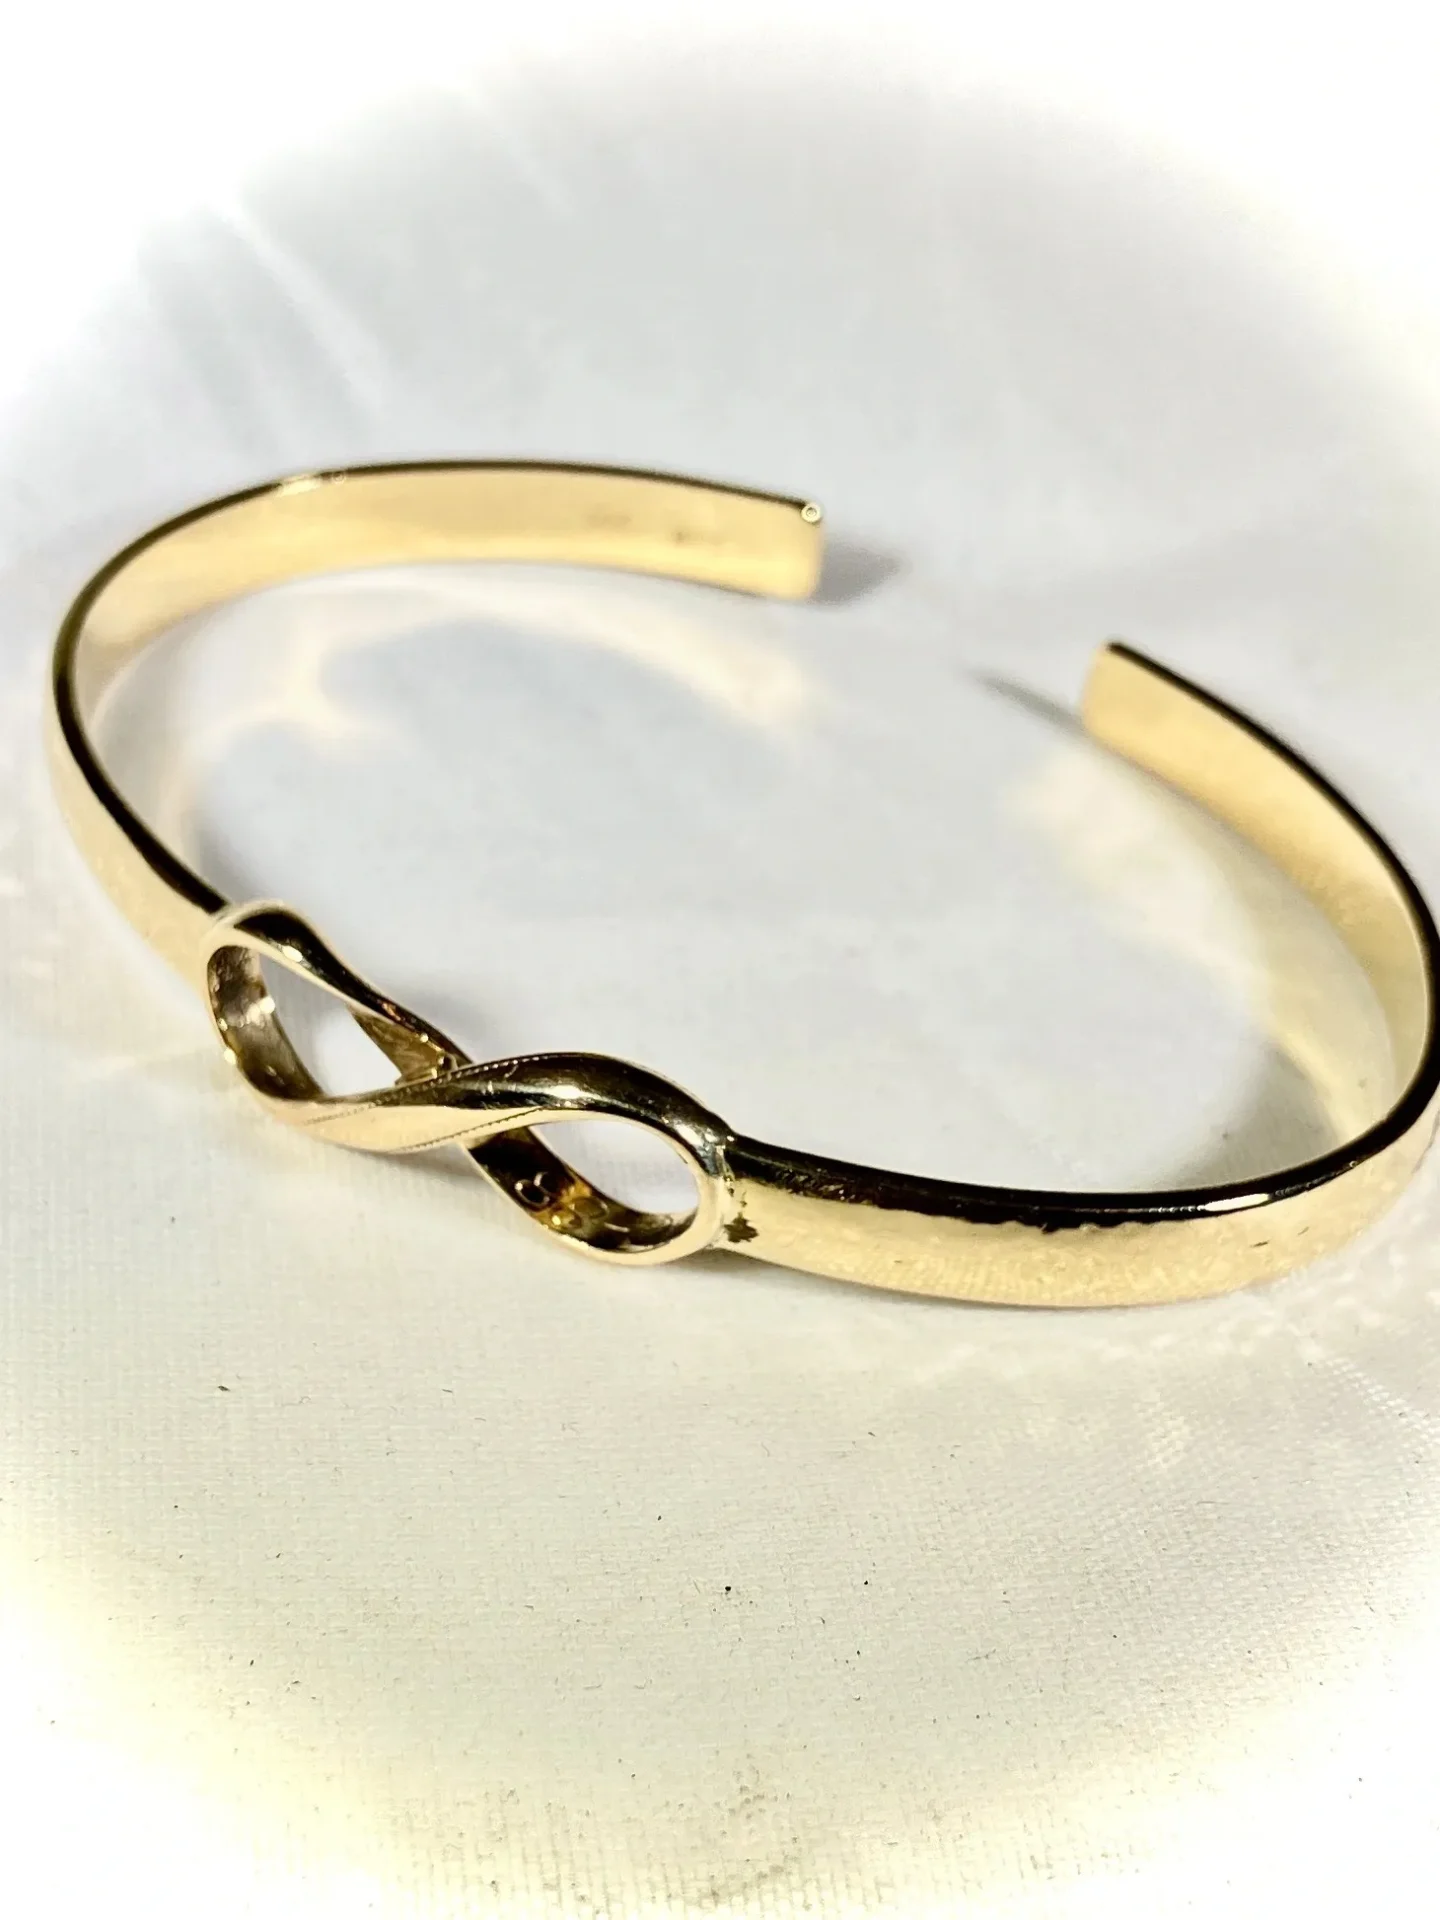 A gold bracelet with an infinity symbol on it.